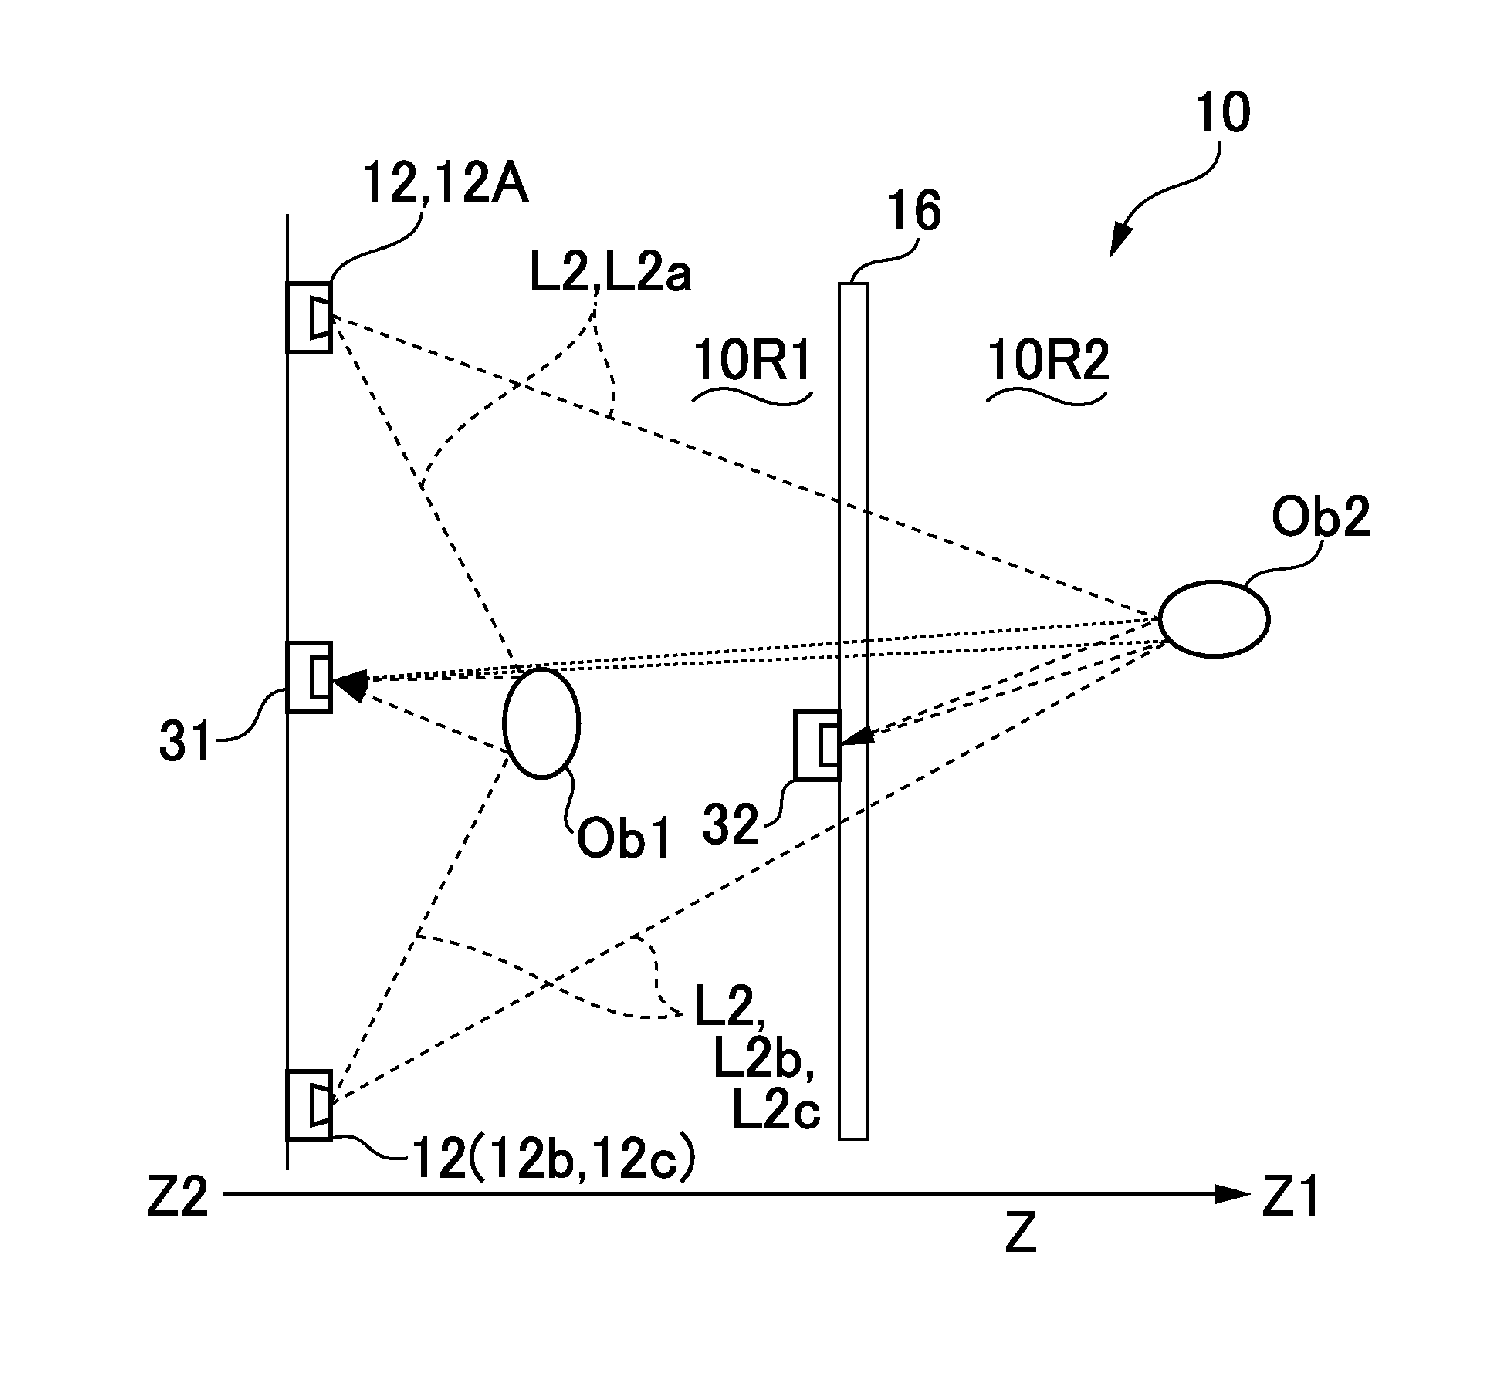 Optical position detection device